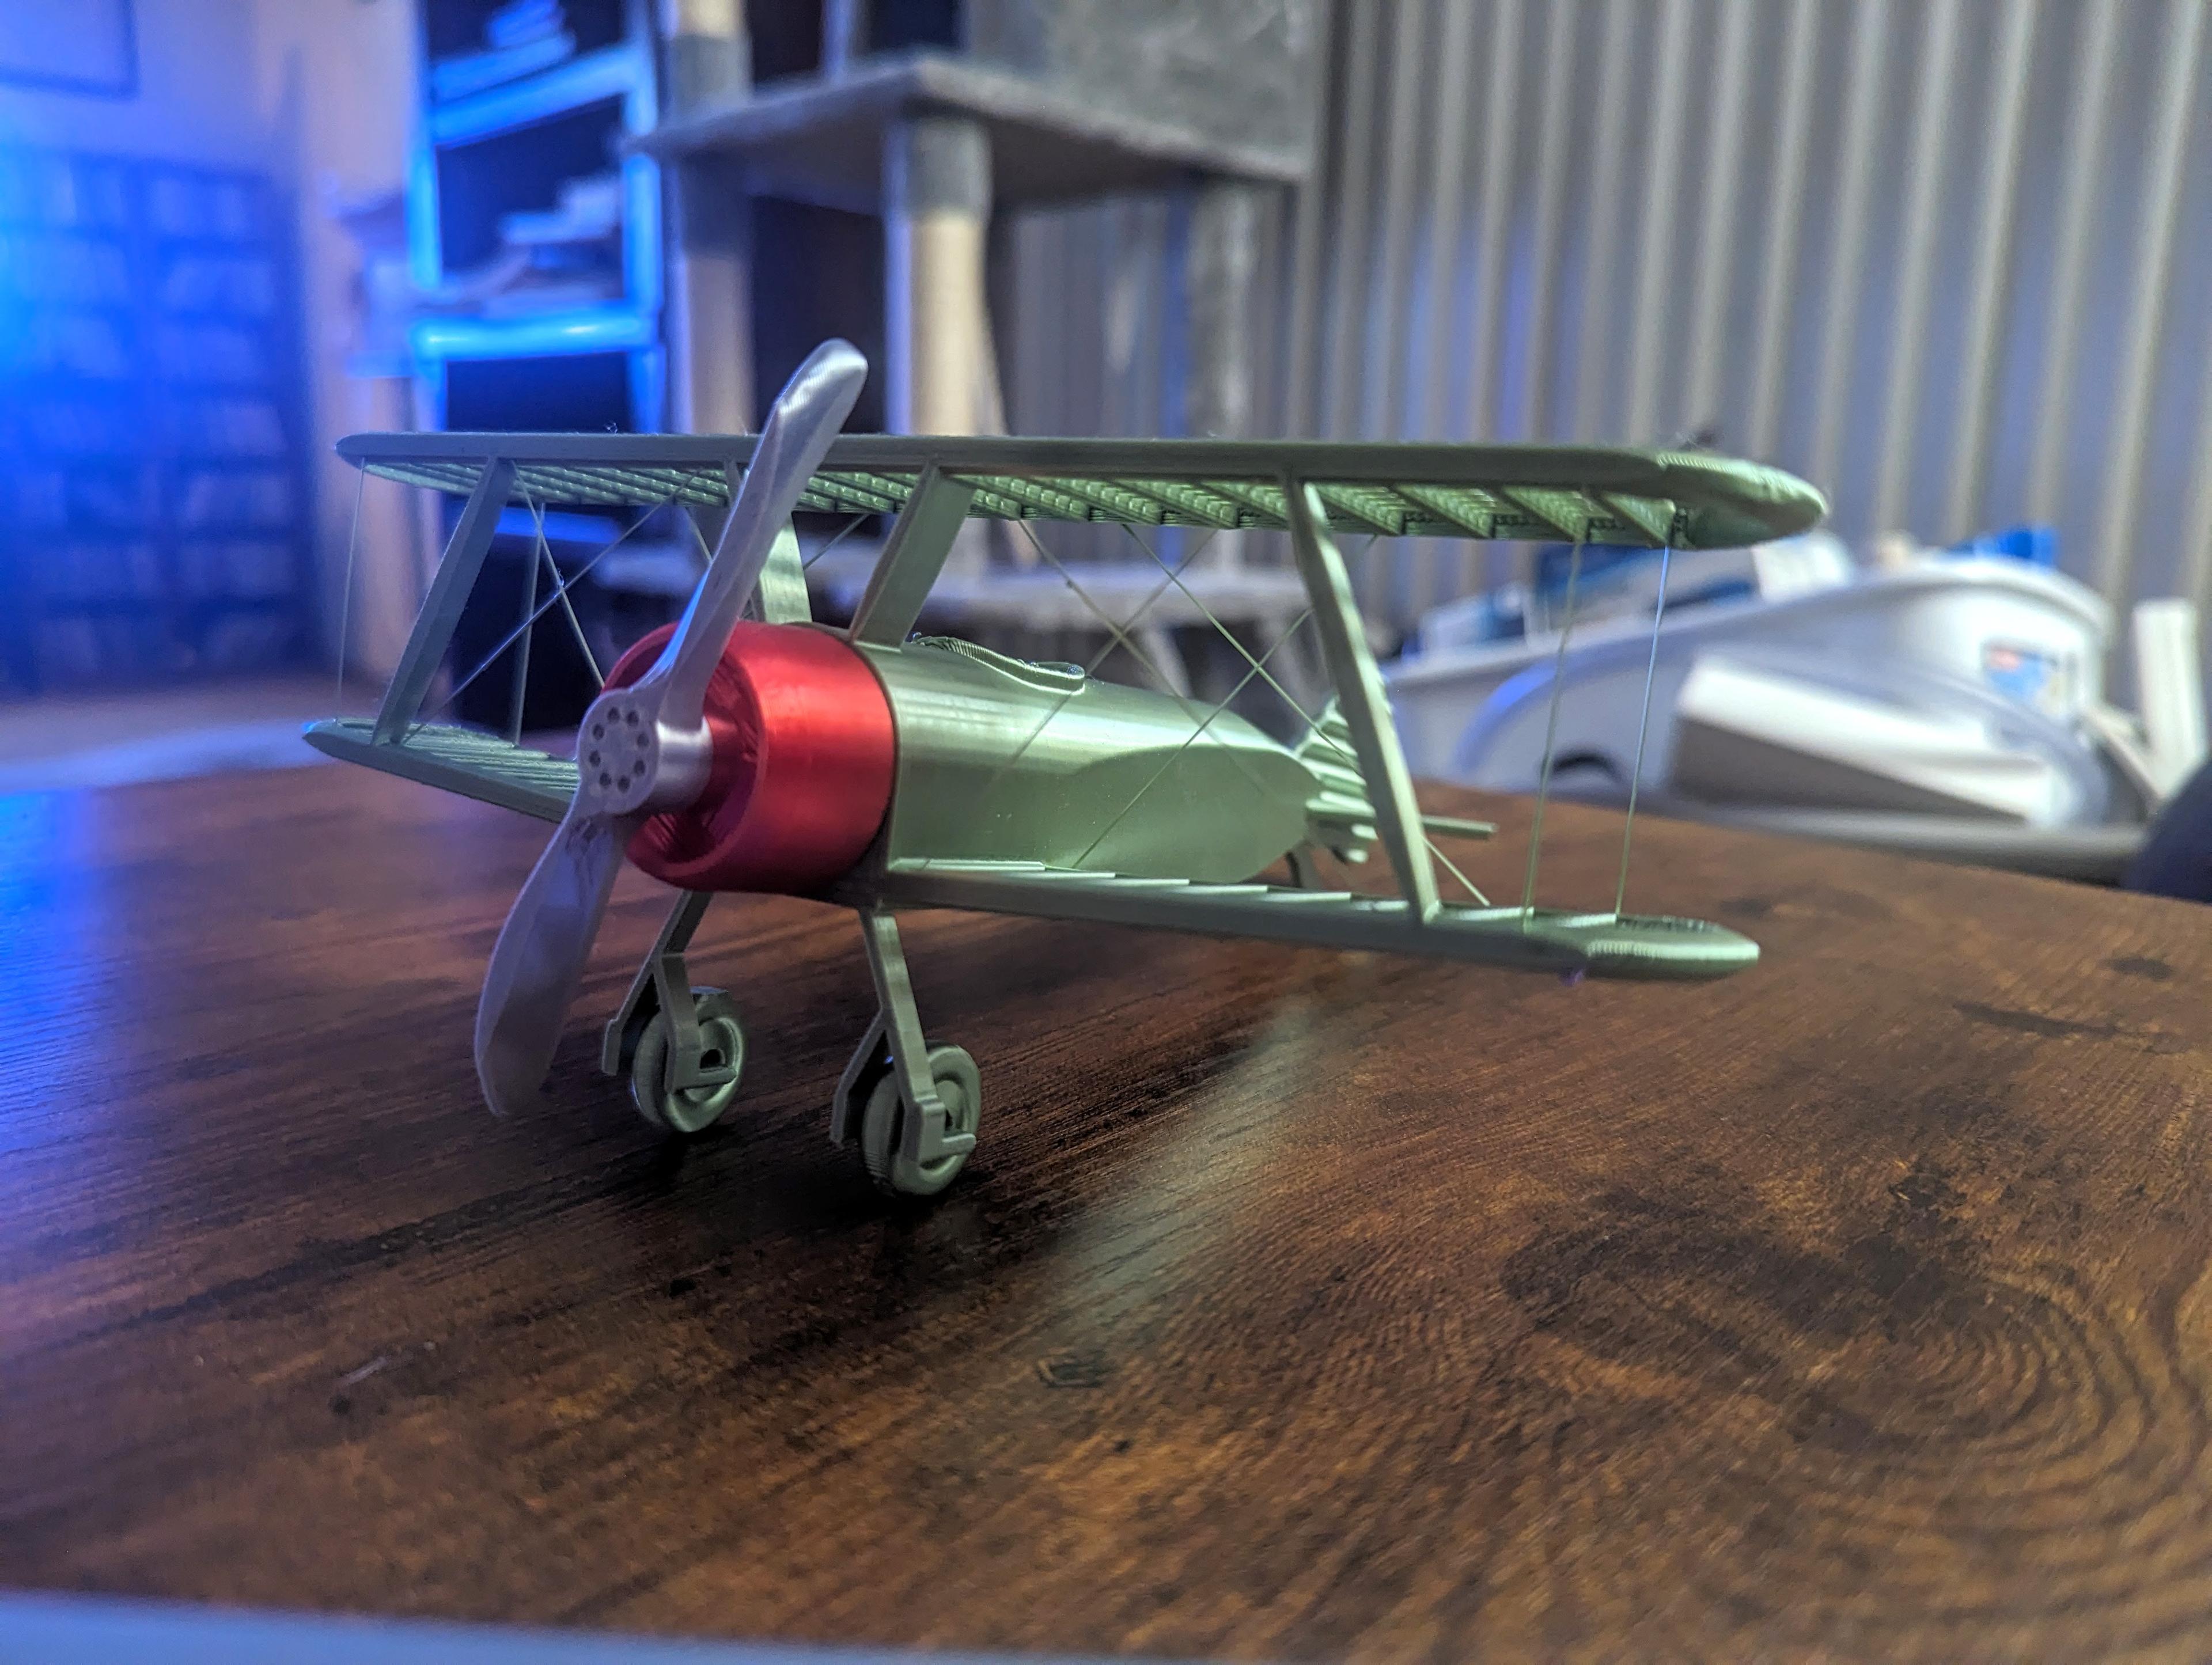 String Biplane:  No Supports - Absolutely amazing design! Thank you so much!
Printed at 0.2. - 3d model